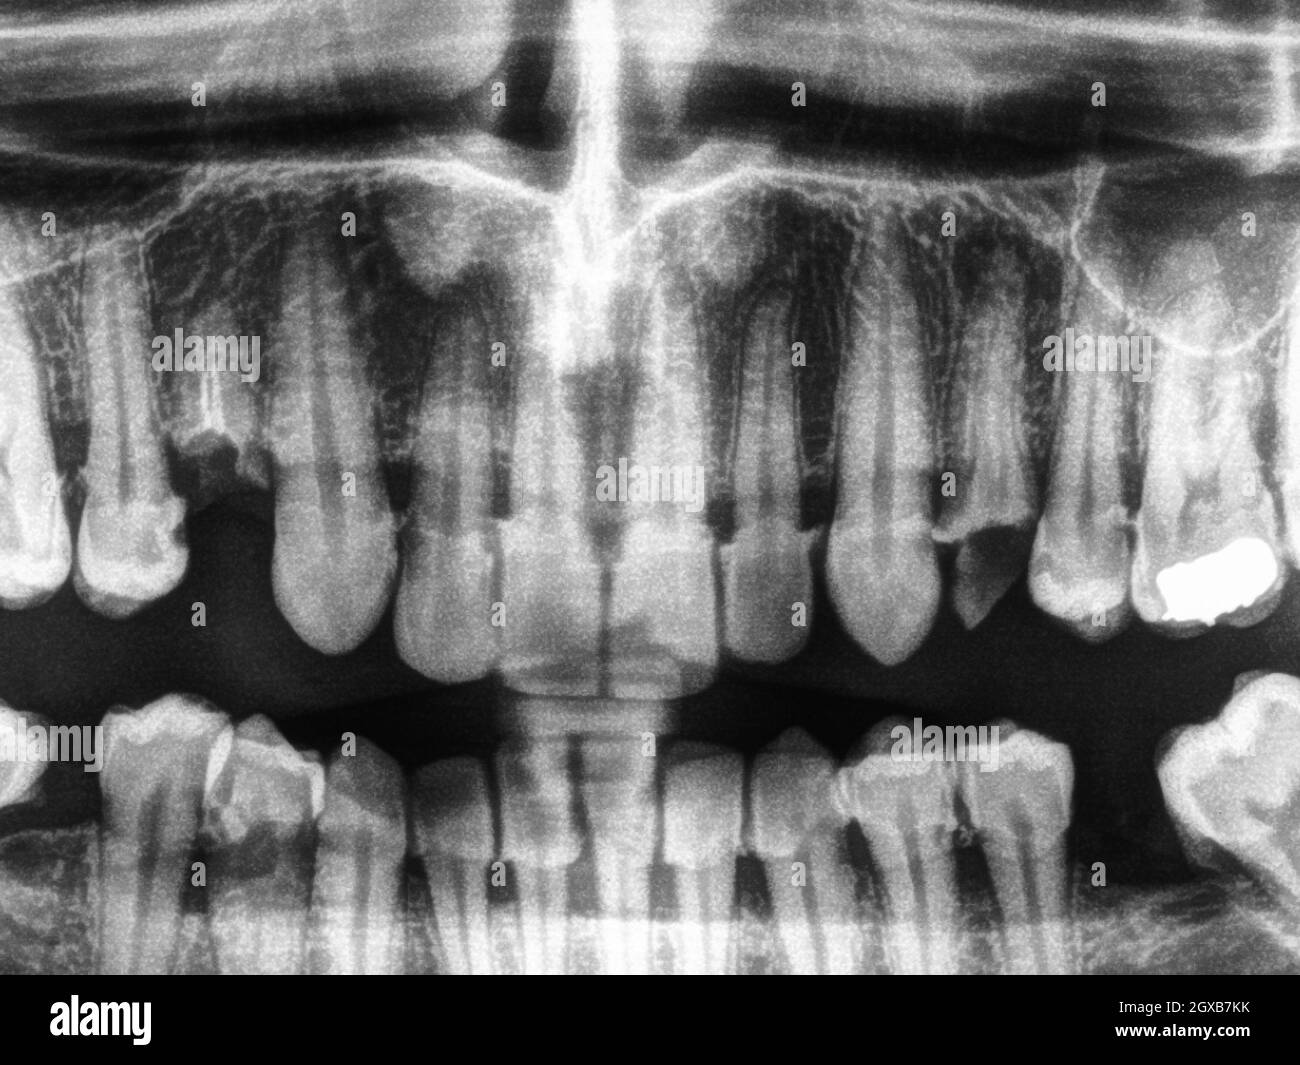 X ray of human mouth with teeth bones in black and white. Stock Photo